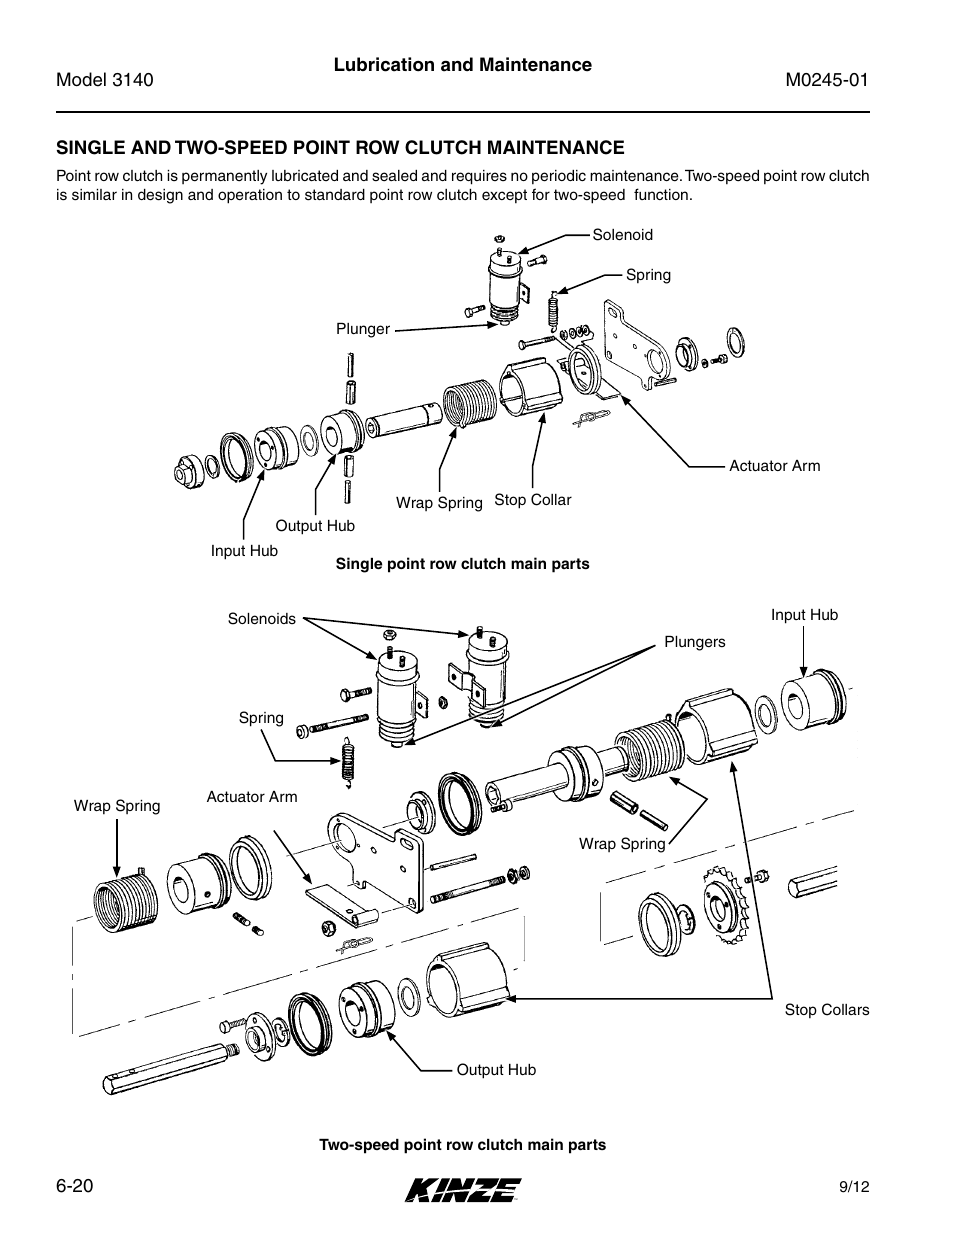 Single and two-speed point row clutch maintenance | Kinze 3140 Stack Fold Planter Rev. 7/14 User Manual | Page 126 / 150